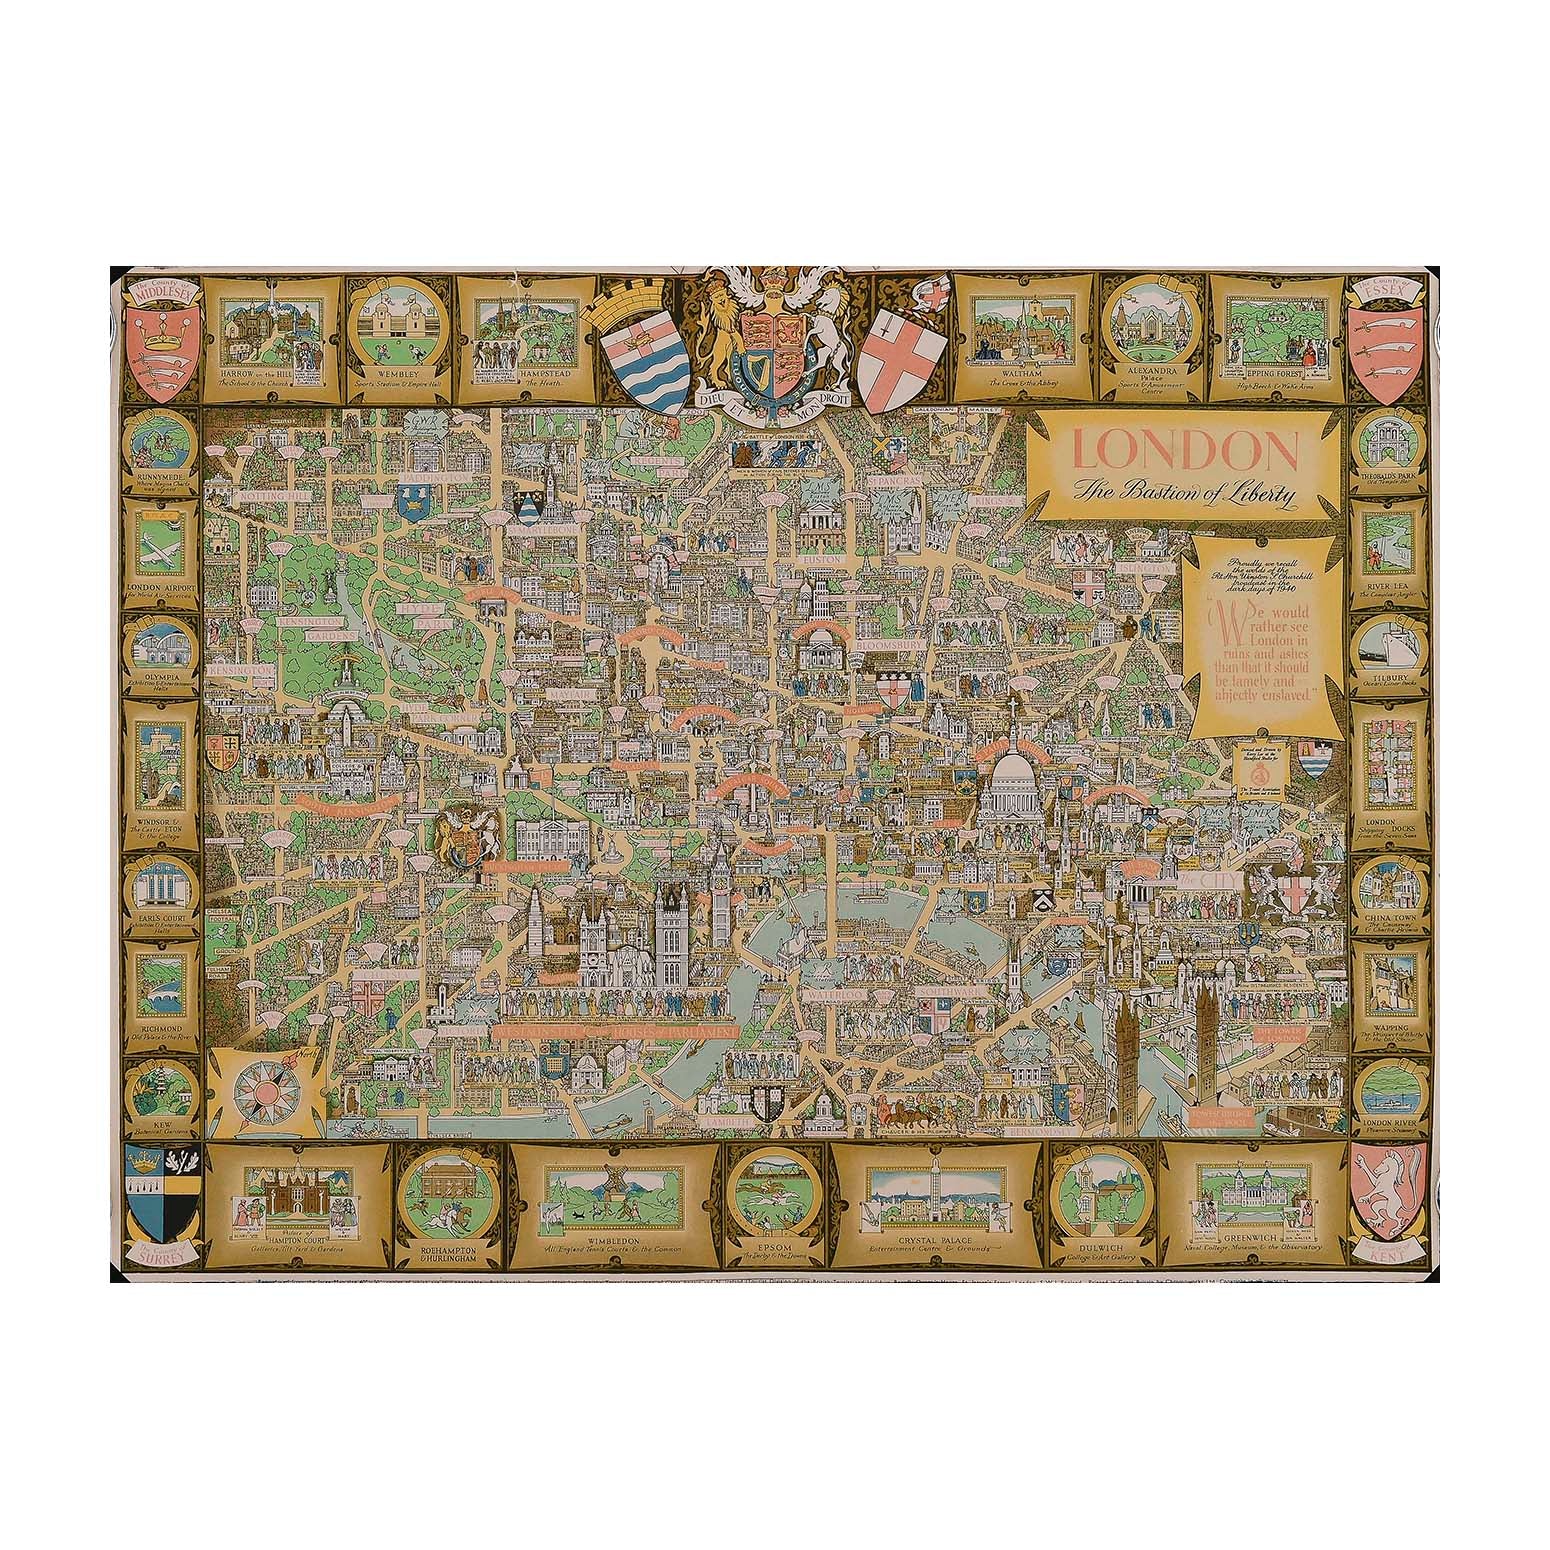 Original pictorial poster map of London, Bastion of Liberty, by the noted poster artist Kerry Lee, published by the British Travel Association, 1946. This highly decorative map is full of period charm, including depictions of historical buildings, famous people, places to visit etc.